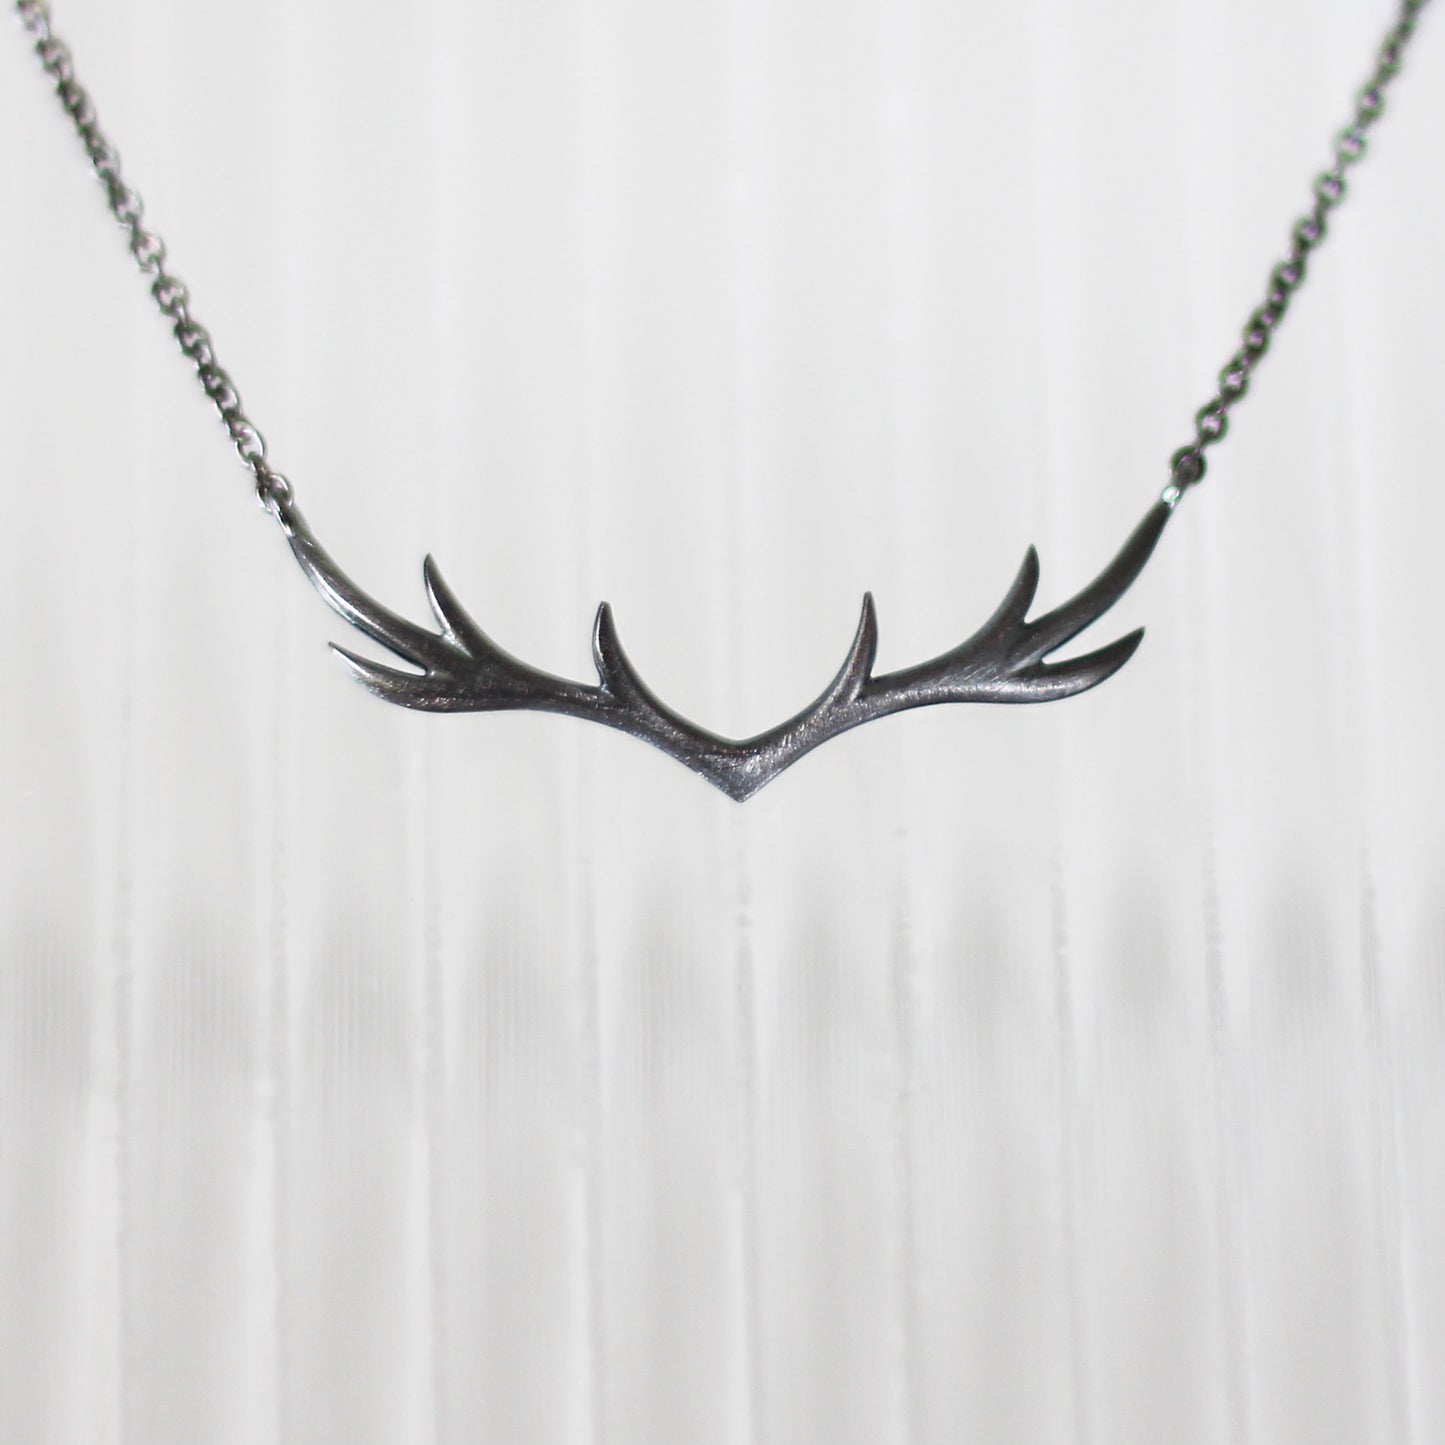 My Deer Necklace - Oxidised Silver